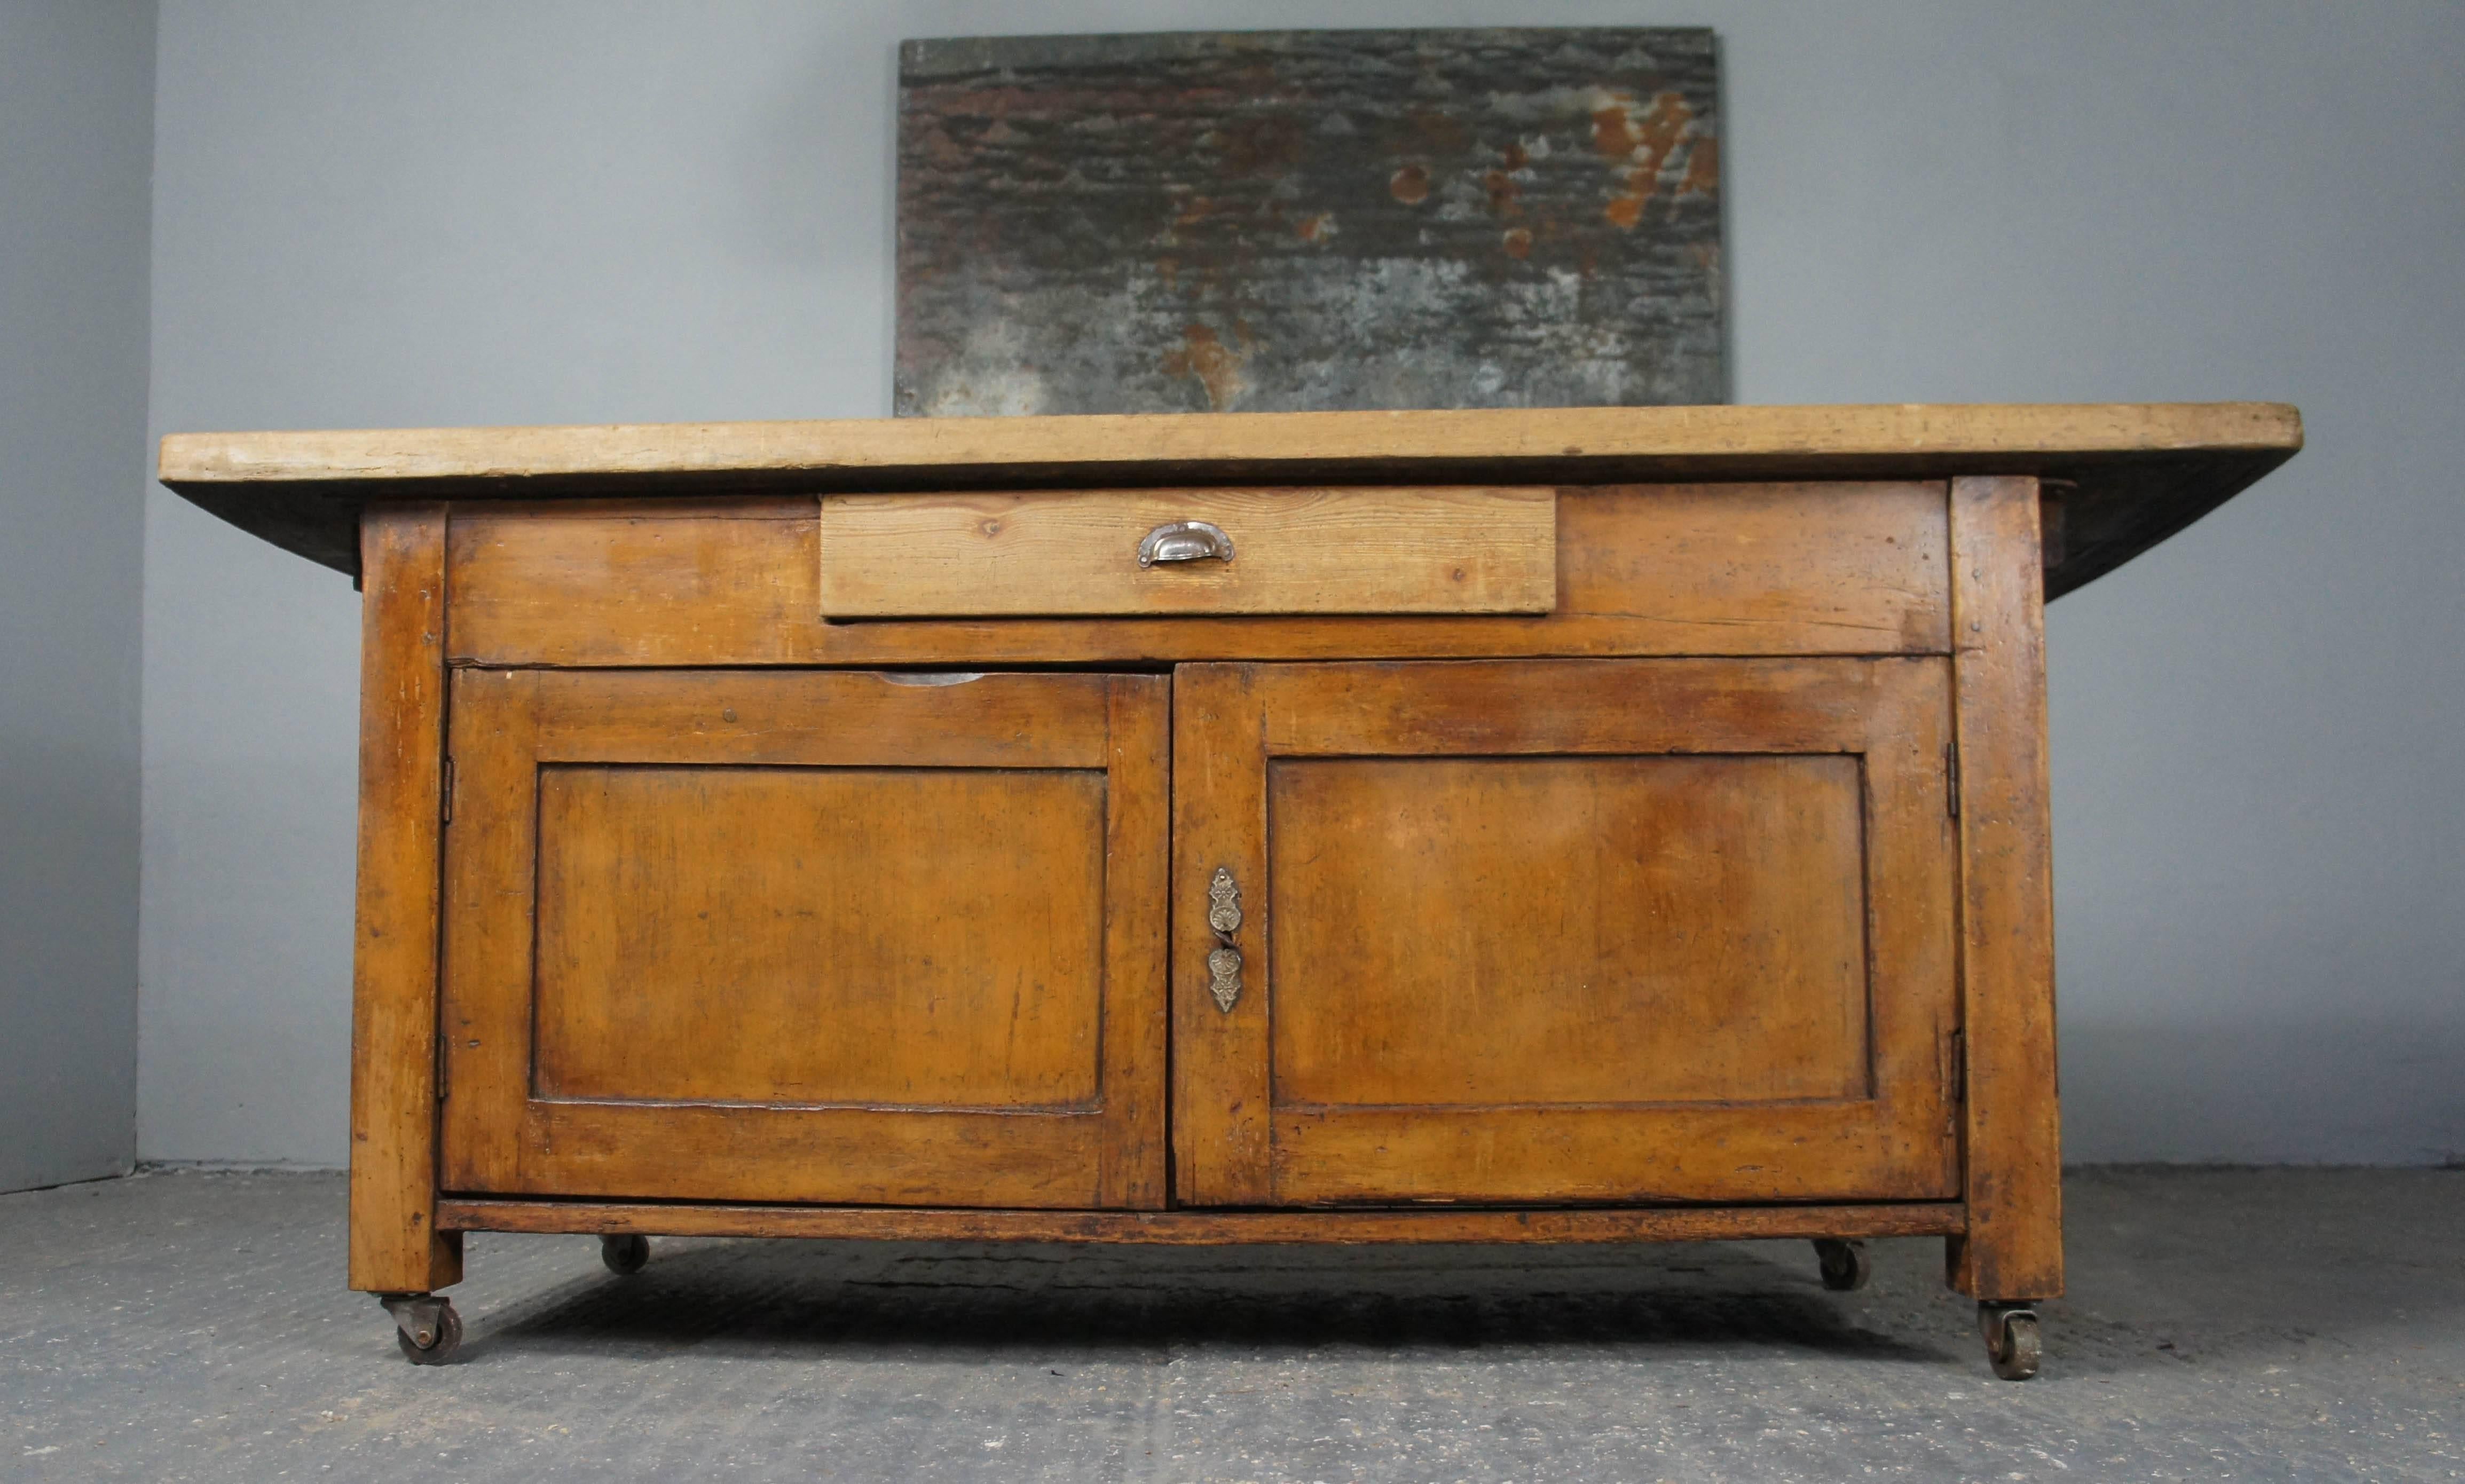 A great looking old baker's table sourced from France. This unit has plenty of storage, provided by a single drawer and large cupboard underneath. It sits on castors which make its easy to move around if required. The beech top has a lovely pale